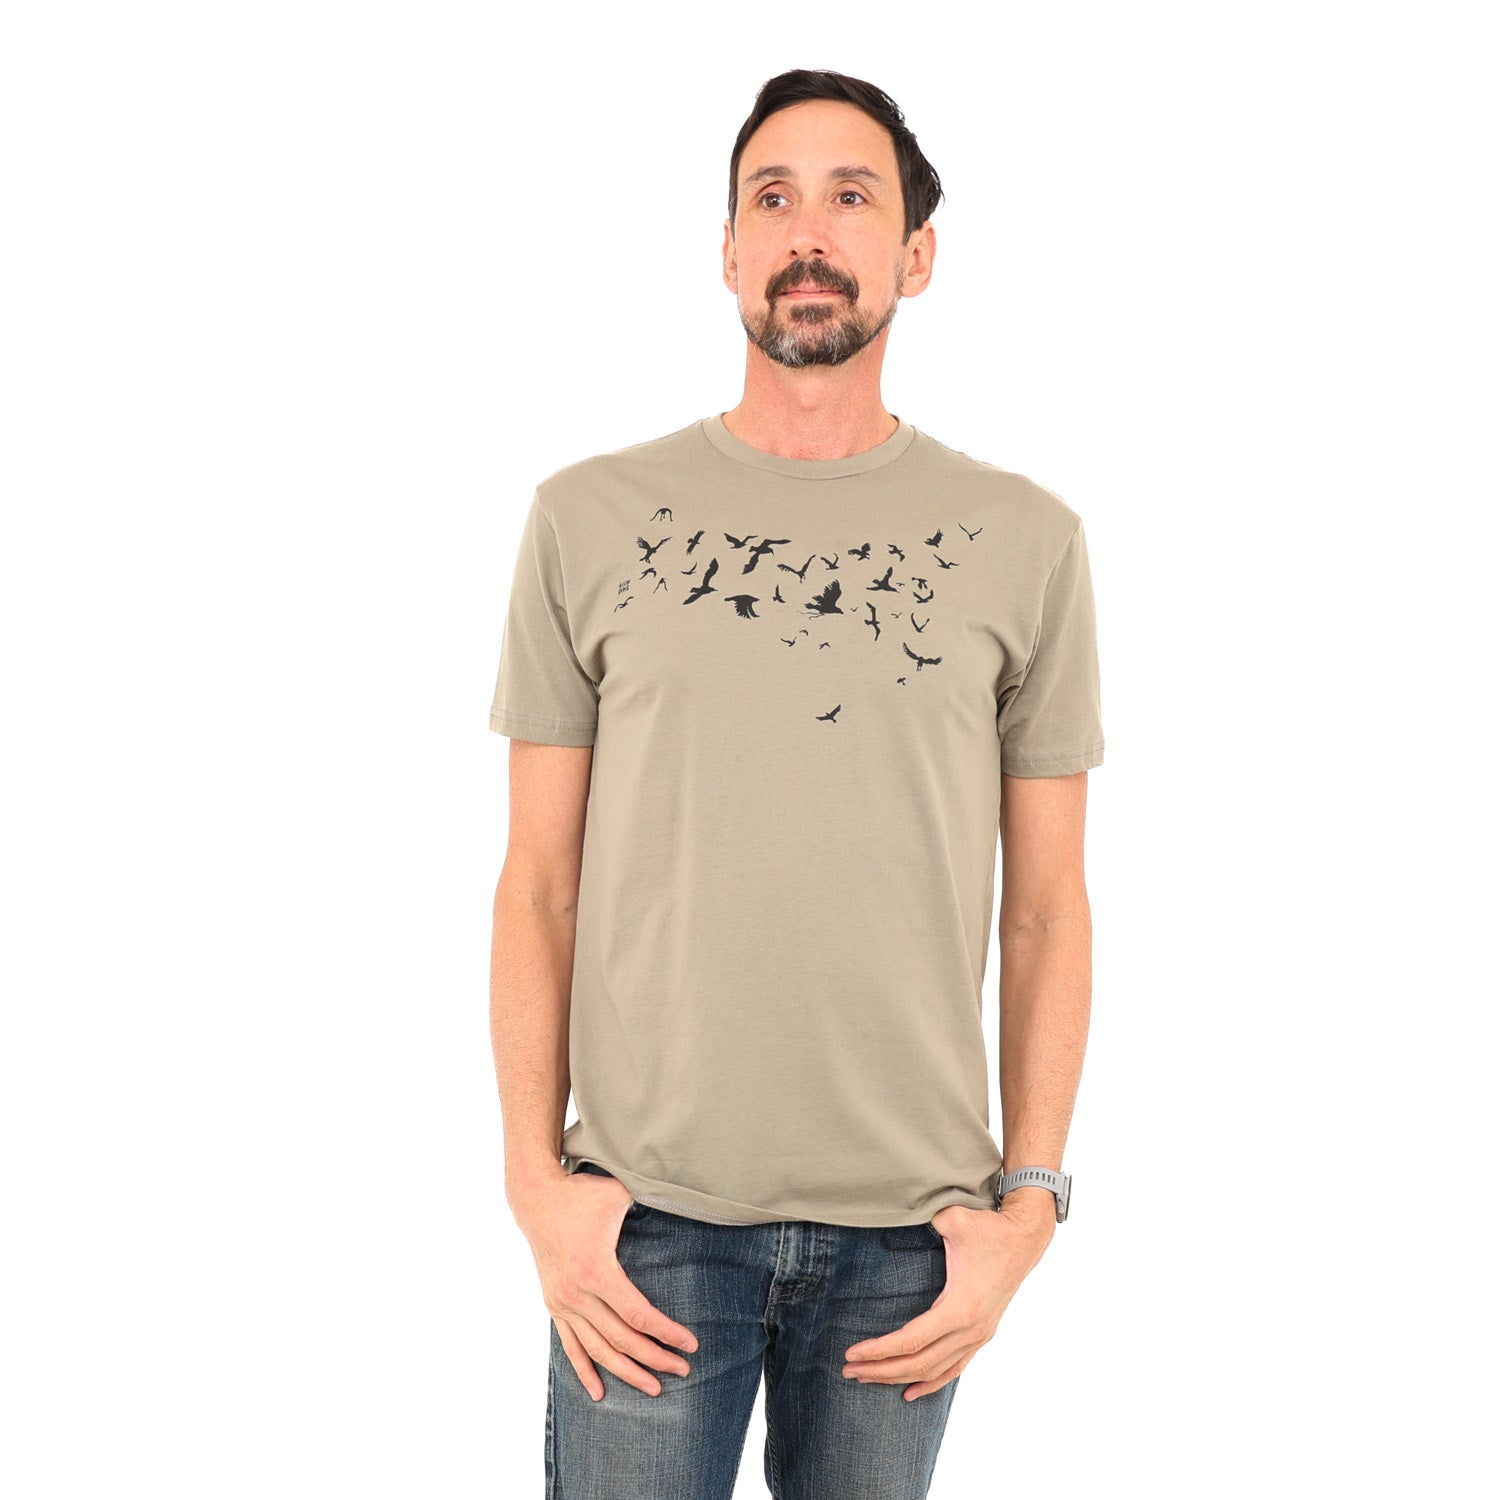 man wearing light brown/tan-ish t-shirt with black ink of birds flying across his chest 